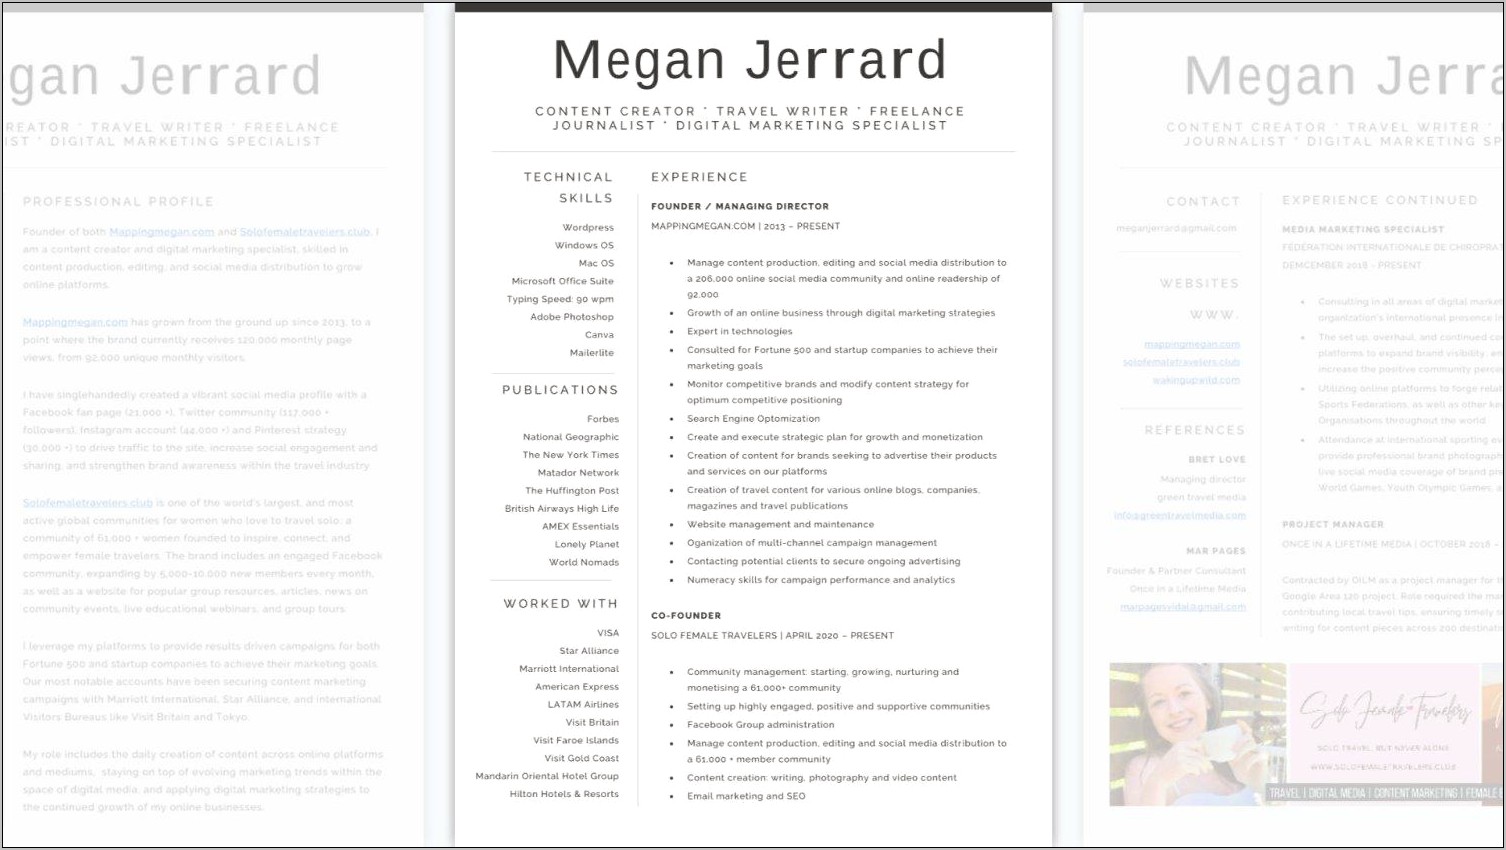 Does Wwoofing Look Good On A Resume